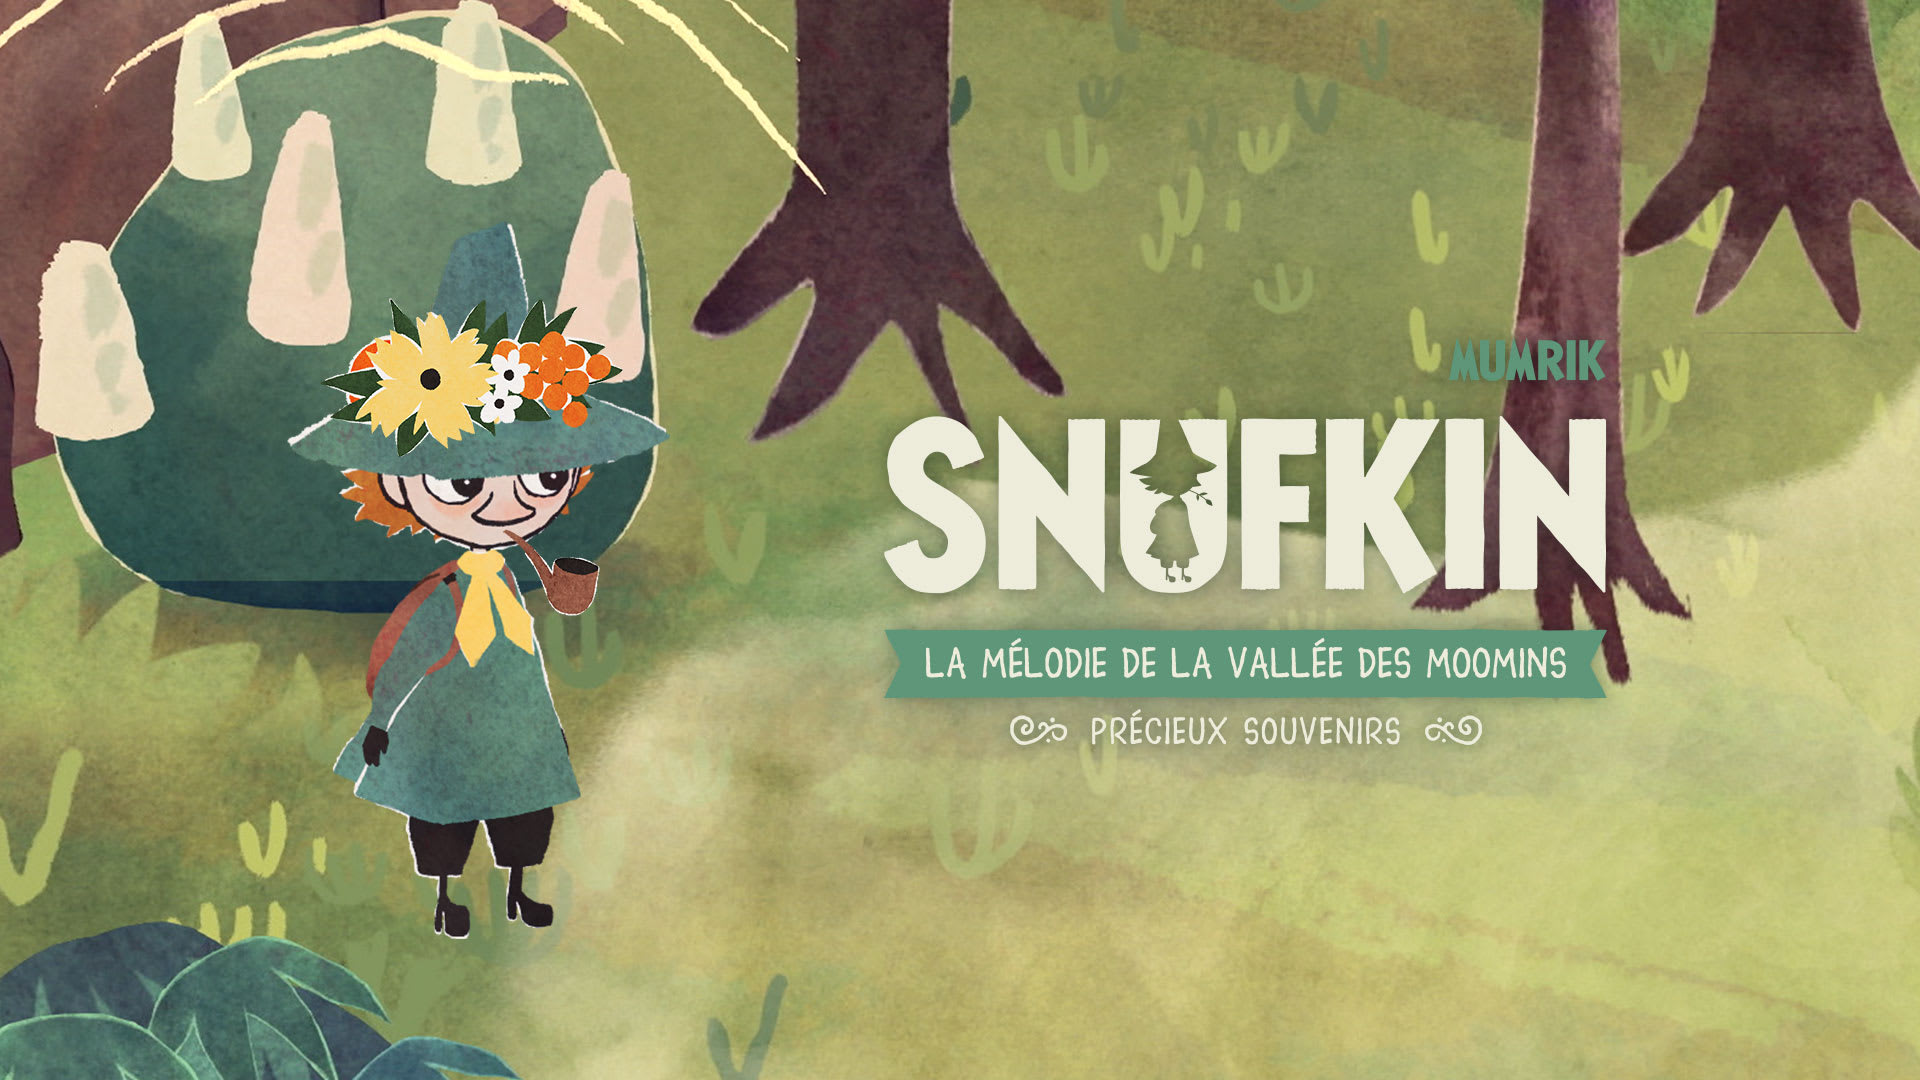 Snufkin: Melody of Moominvalley - Précieux souvenirs